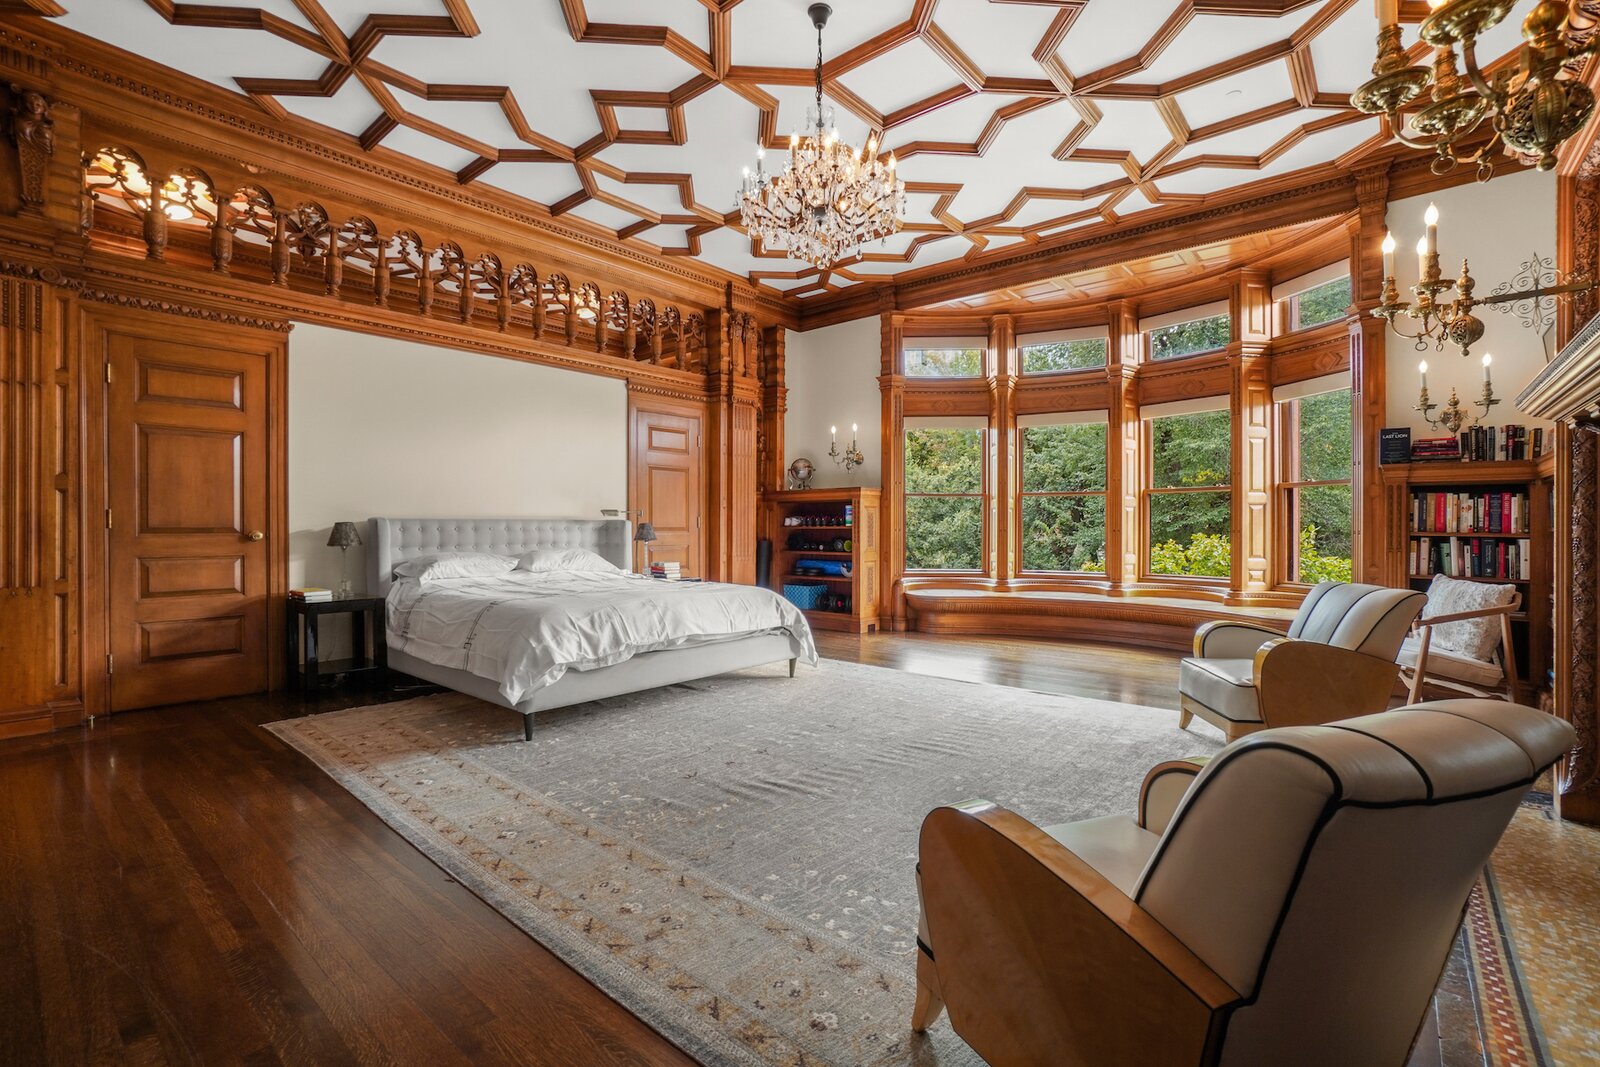 An Historic Peabody & Stearns Duplex in Boston With Coffered Ceilings